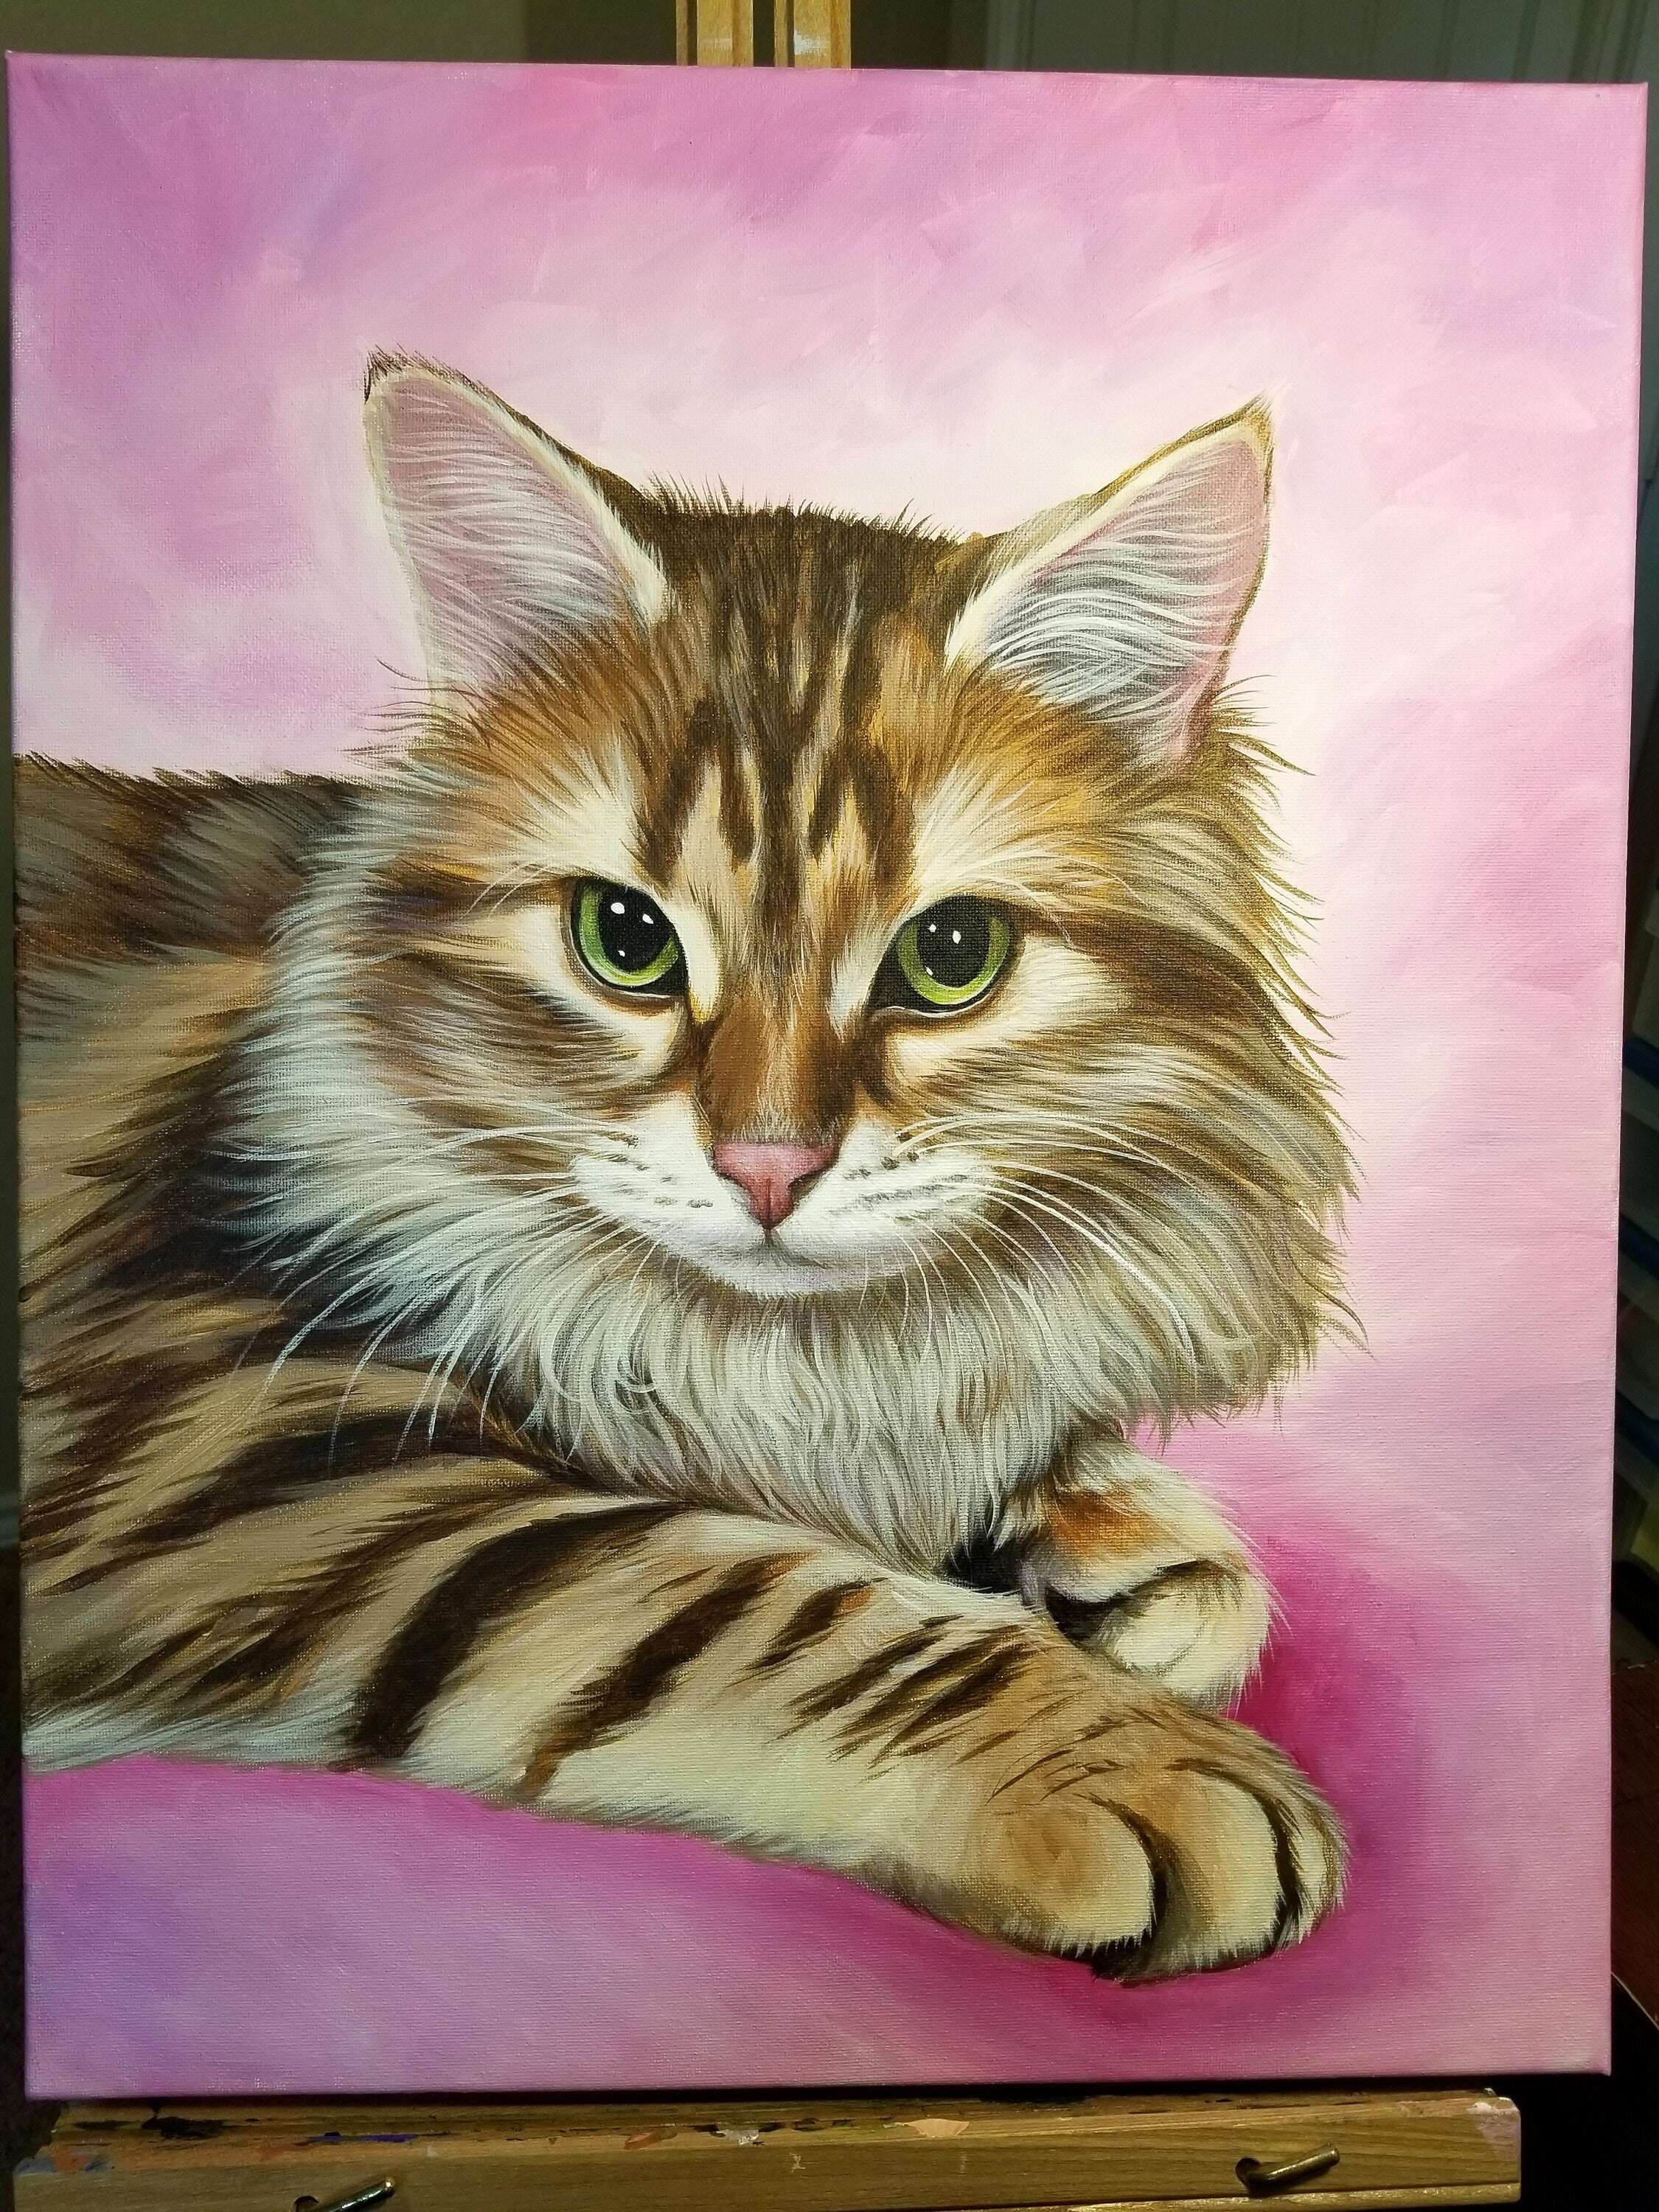 Lifelike pet portrait painting of a tabby cat with green eyes against a pink background, displayed on an easel.